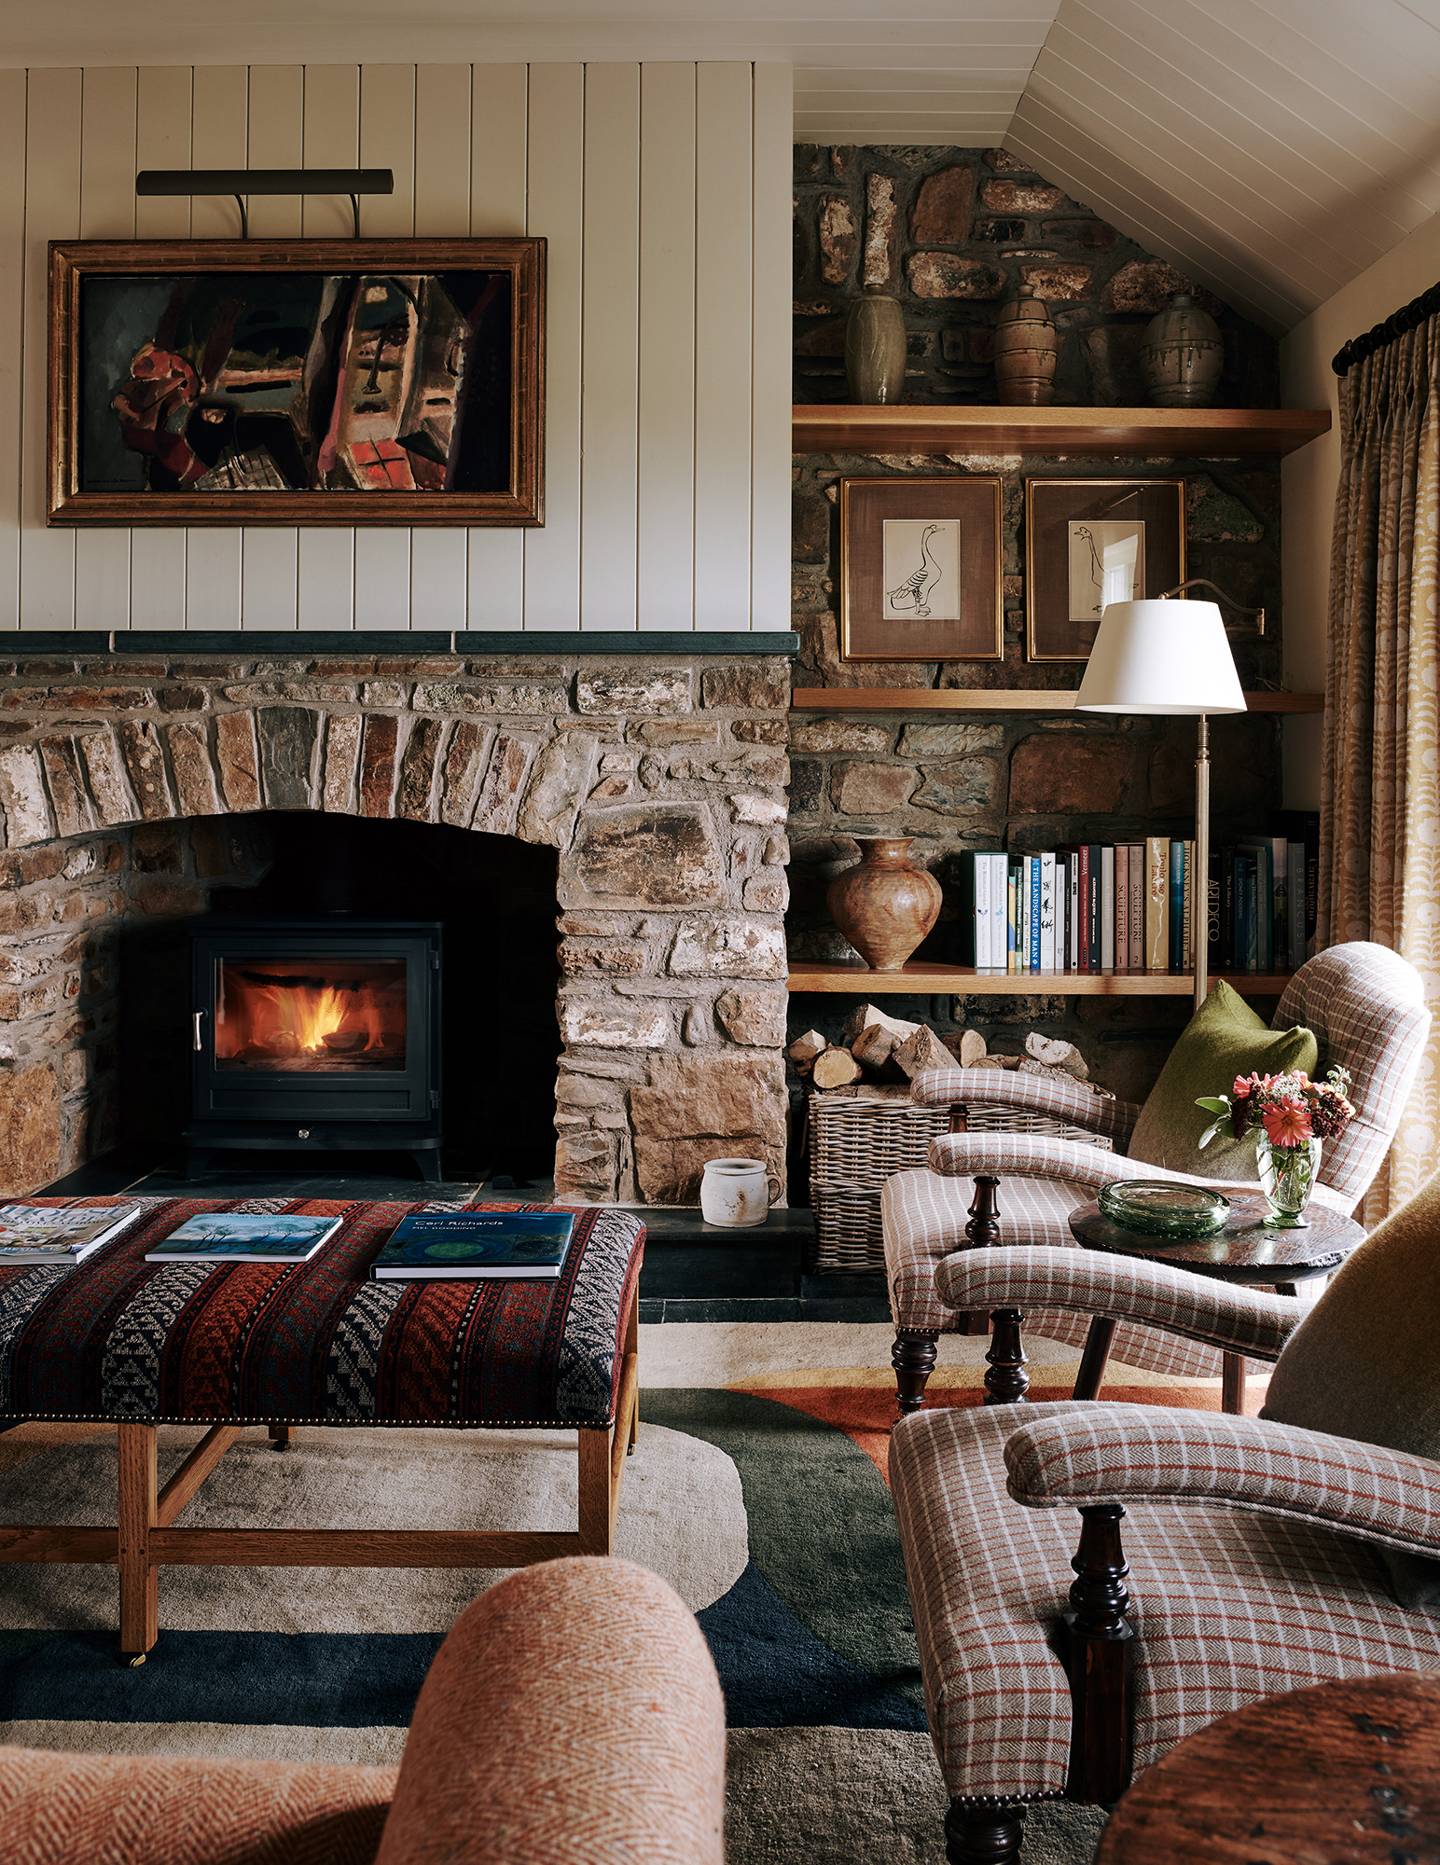 A Return To Roots: The Historical Evolution Of Cottage Interiors